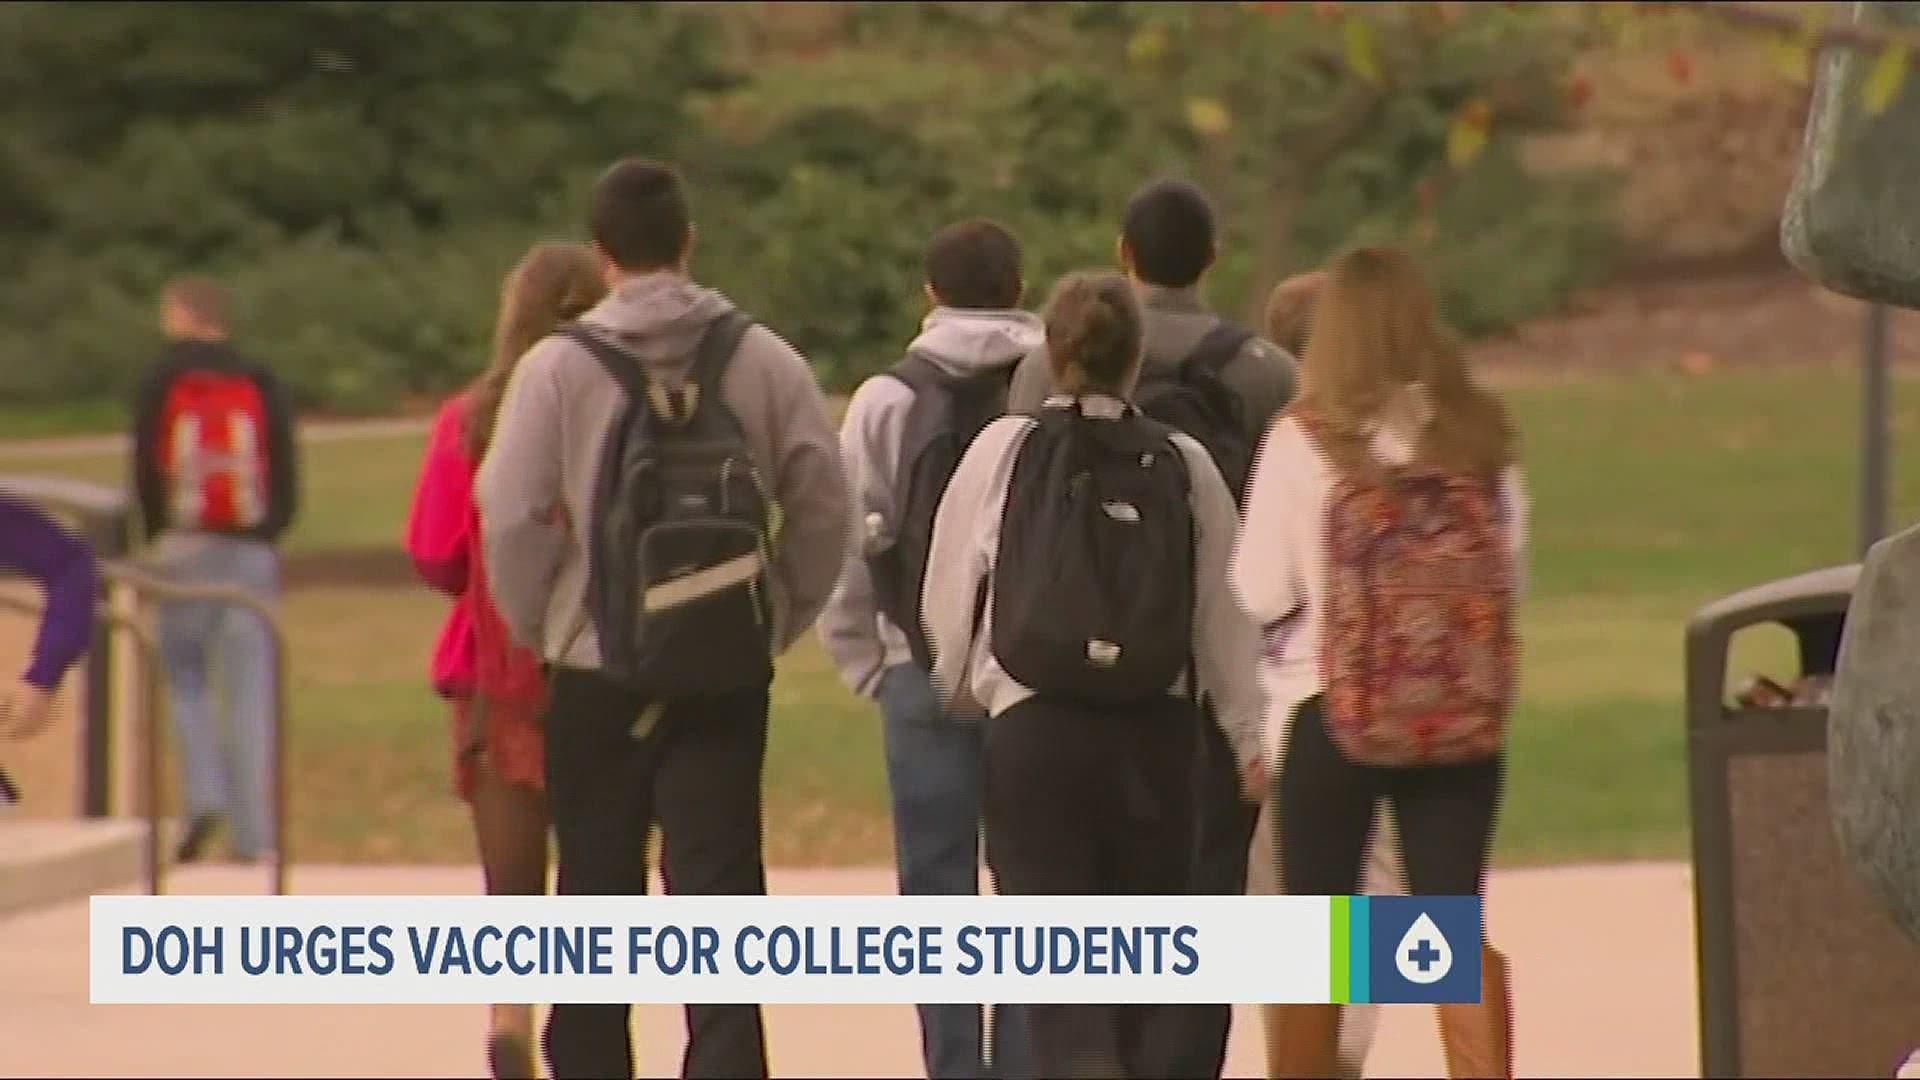 Some students think colleges and universities should go further by requiring vaccination to attend classes in the fall.